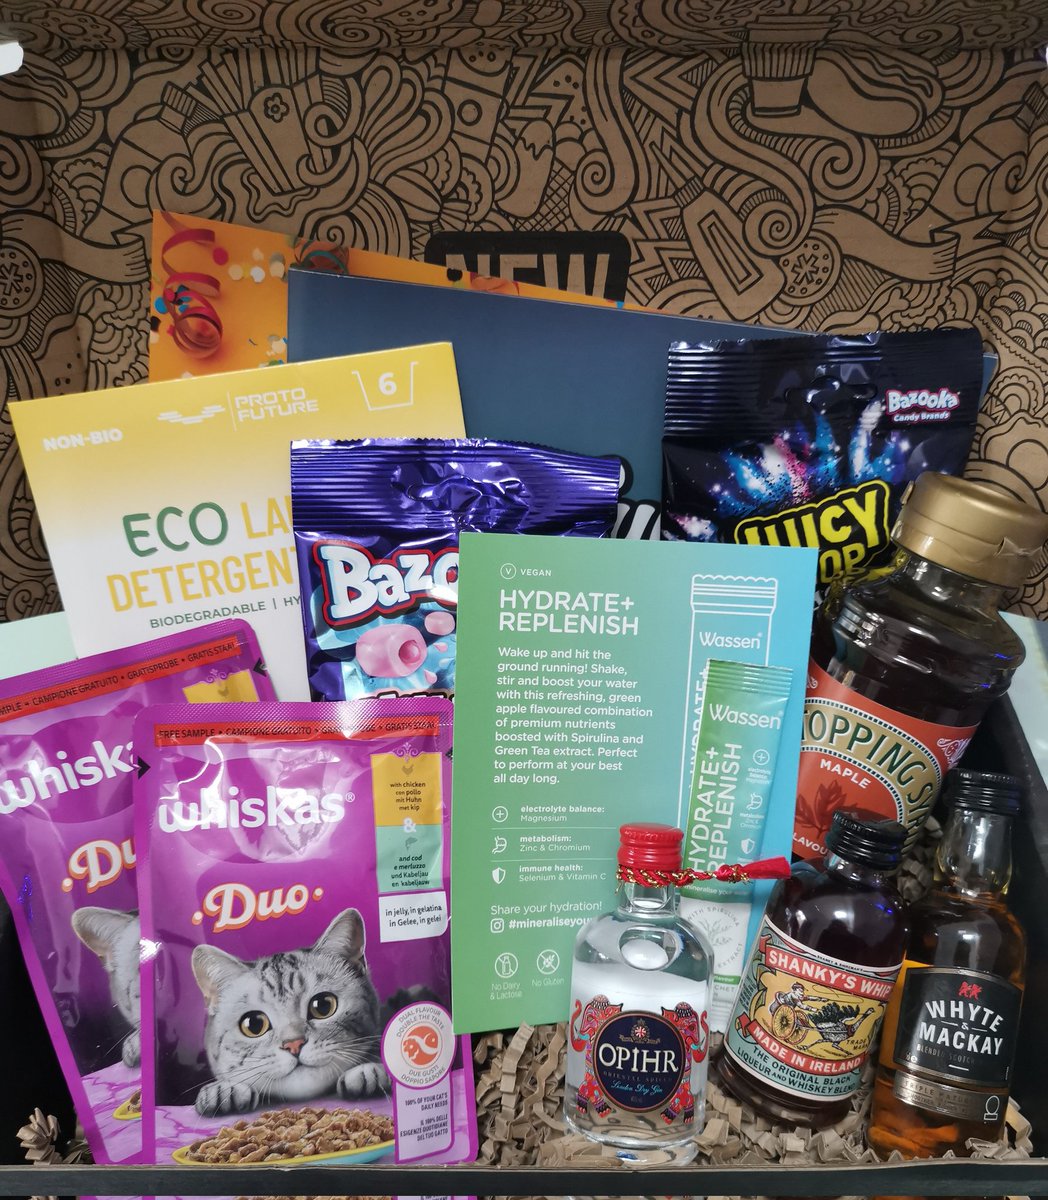 Super excited to receive my #triyit campaign box. Crammed full of goodies from #DiscoverOpihr #LylesGoldenSyrup #WhyteandMackay #TryWhiskas #ShankysWhip #MineraliseYourWater #BazookaMixUpz #ProtoFuture